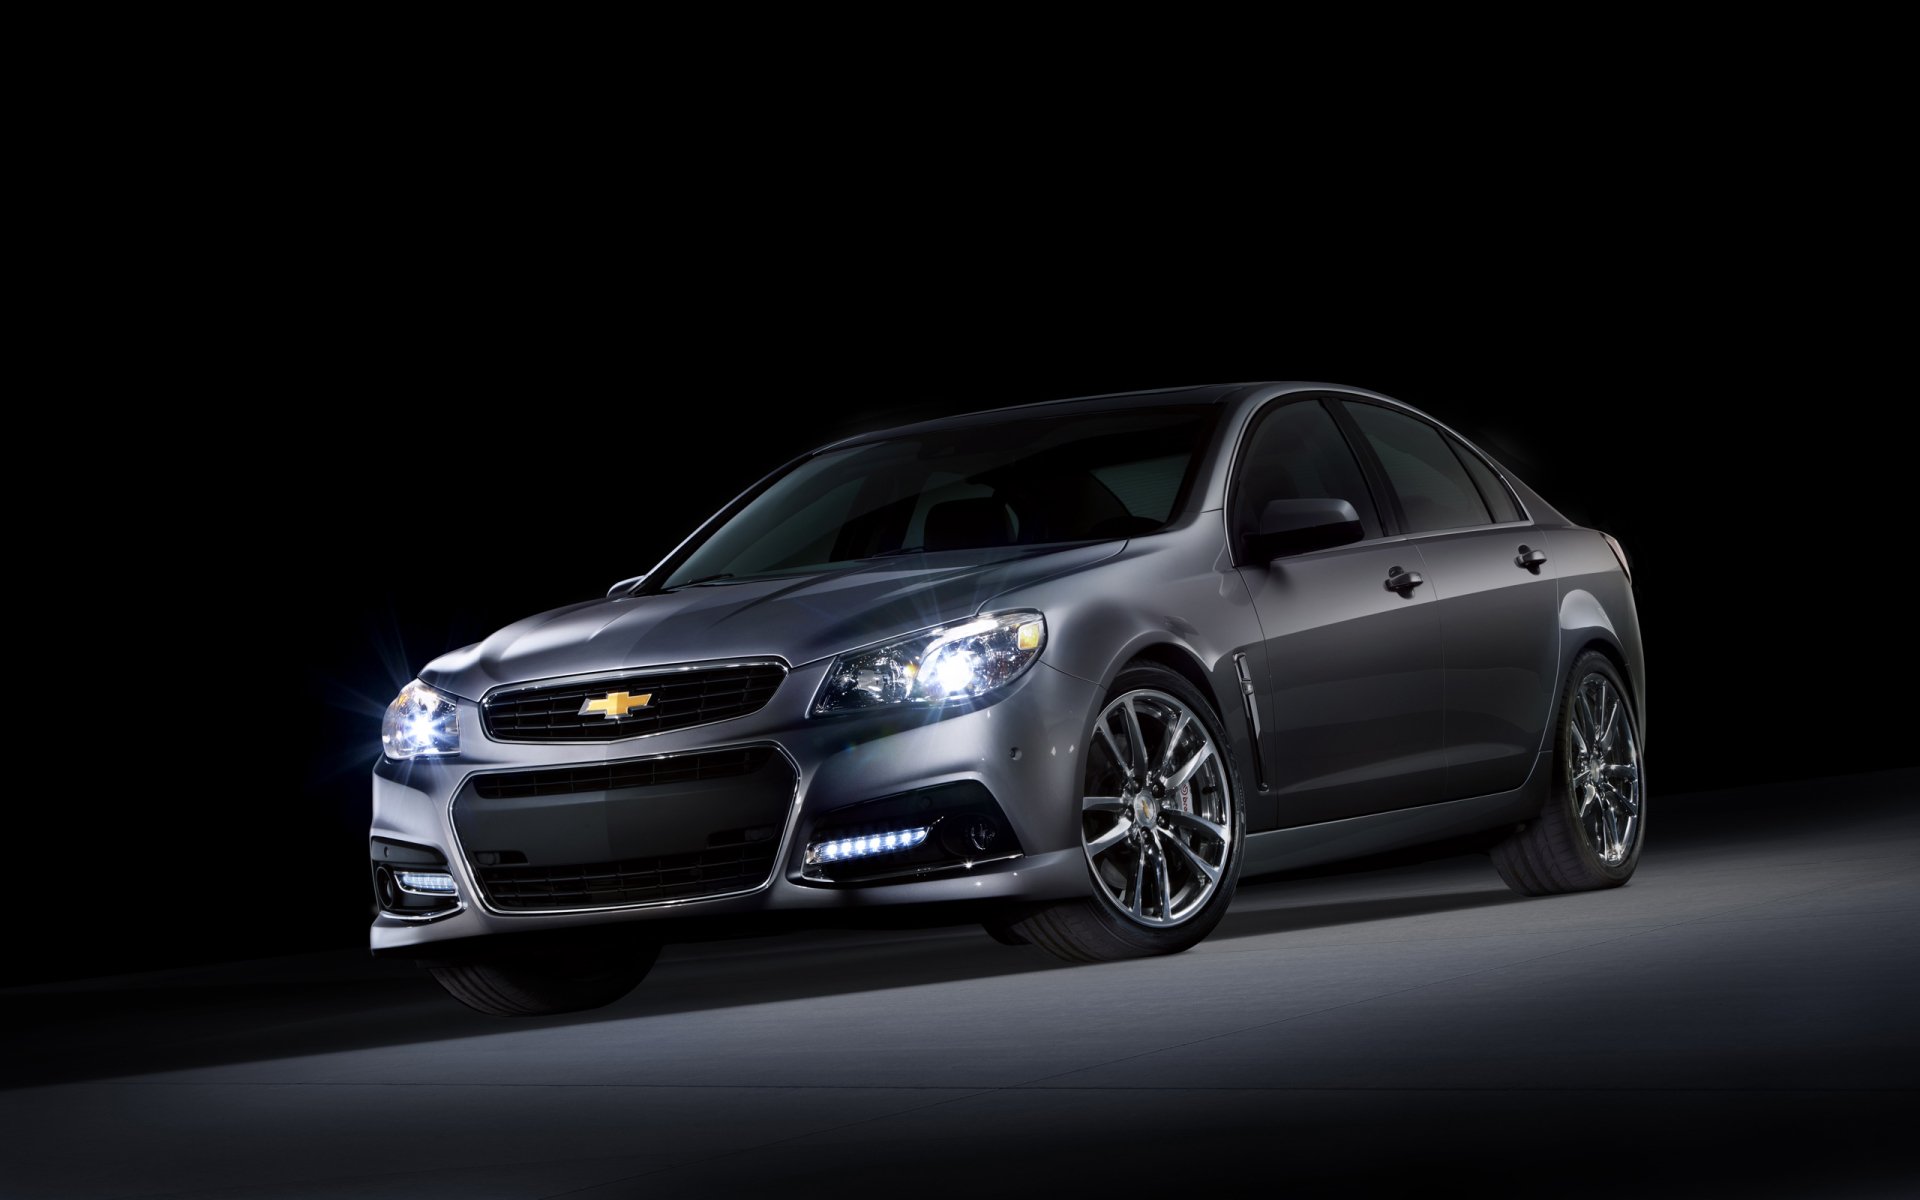 Chevrolet Ss Wallpapers